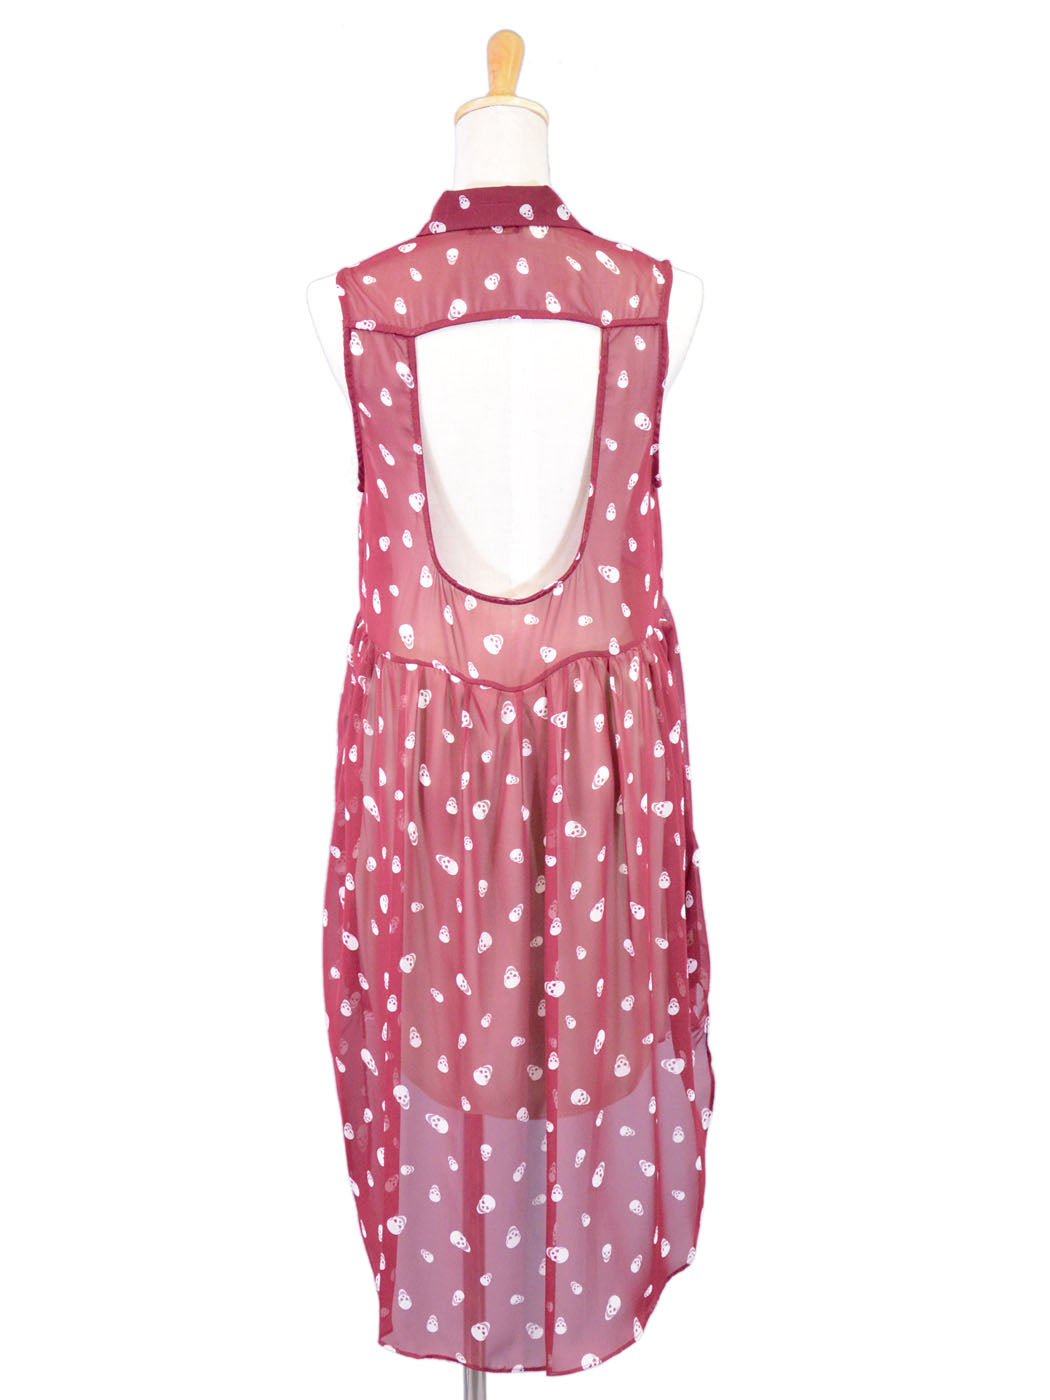 Audrey 3 + 1 All Over Skull Print Collared Hi Low Sleeveless Cut Out Back Dress - ALILANG.COM